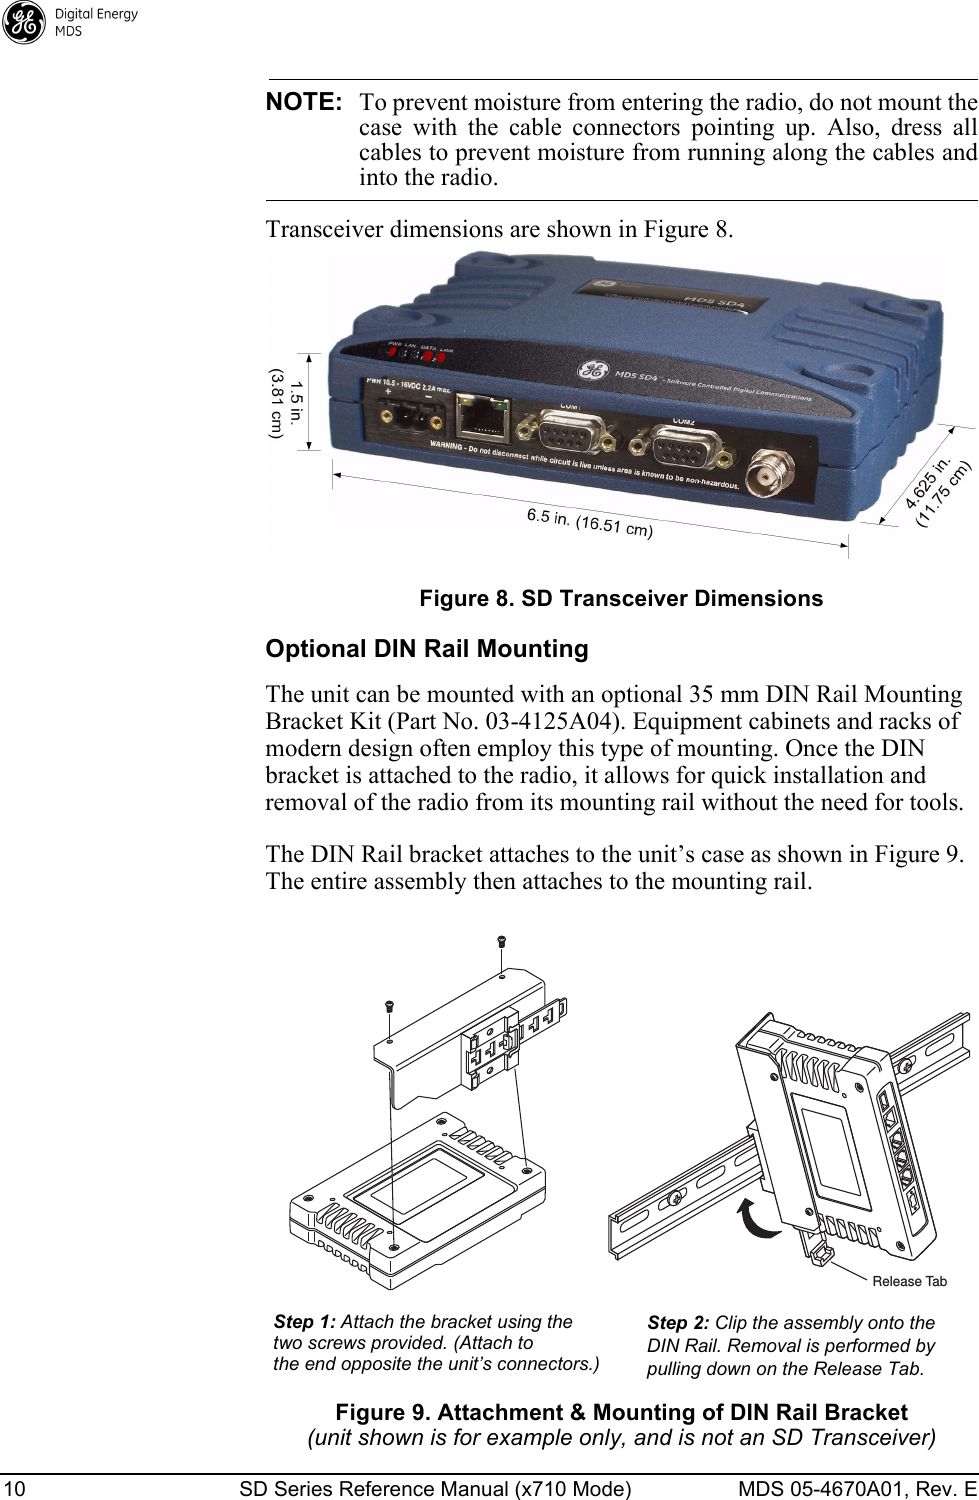 10 SD Series Reference Manual (x710 Mode) MDS 05-4670A01, Rev. E NOTE: To prevent moisture from entering the radio, do not mount thecase  with  the  cable  connectors  pointing  up.  Also,  dress  allcables to prevent moisture from running along the cables andinto the radio.Transceiver dimensions are shown in Figure 8.Figure 8. SD Transceiver DimensionsOptional DIN Rail MountingThe unit can be mounted with an optional 35 mm DIN Rail Mounting Bracket Kit (Part No. 03-4125A04). Equipment cabinets and racks of modern design often employ this type of mounting. Once the DIN bracket is attached to the radio, it allows for quick installation and removal of the radio from its mounting rail without the need for tools.The DIN Rail bracket attaches to the unit’s case as shown in Figure 9. The entire assembly then attaches to the mounting rail.Figure 9. Attachment &amp; Mounting of DIN Rail Bracket(unit shown is for example only, and is not an SD Transceiver)Step 1: Attach the bracket using the Step 2: Clip the assembly onto theDIN Rail. Removal is performed bypulling down on the Release Tab.Release Tab two screws provided. (Attach tothe end opposite the unit’s connectors.)